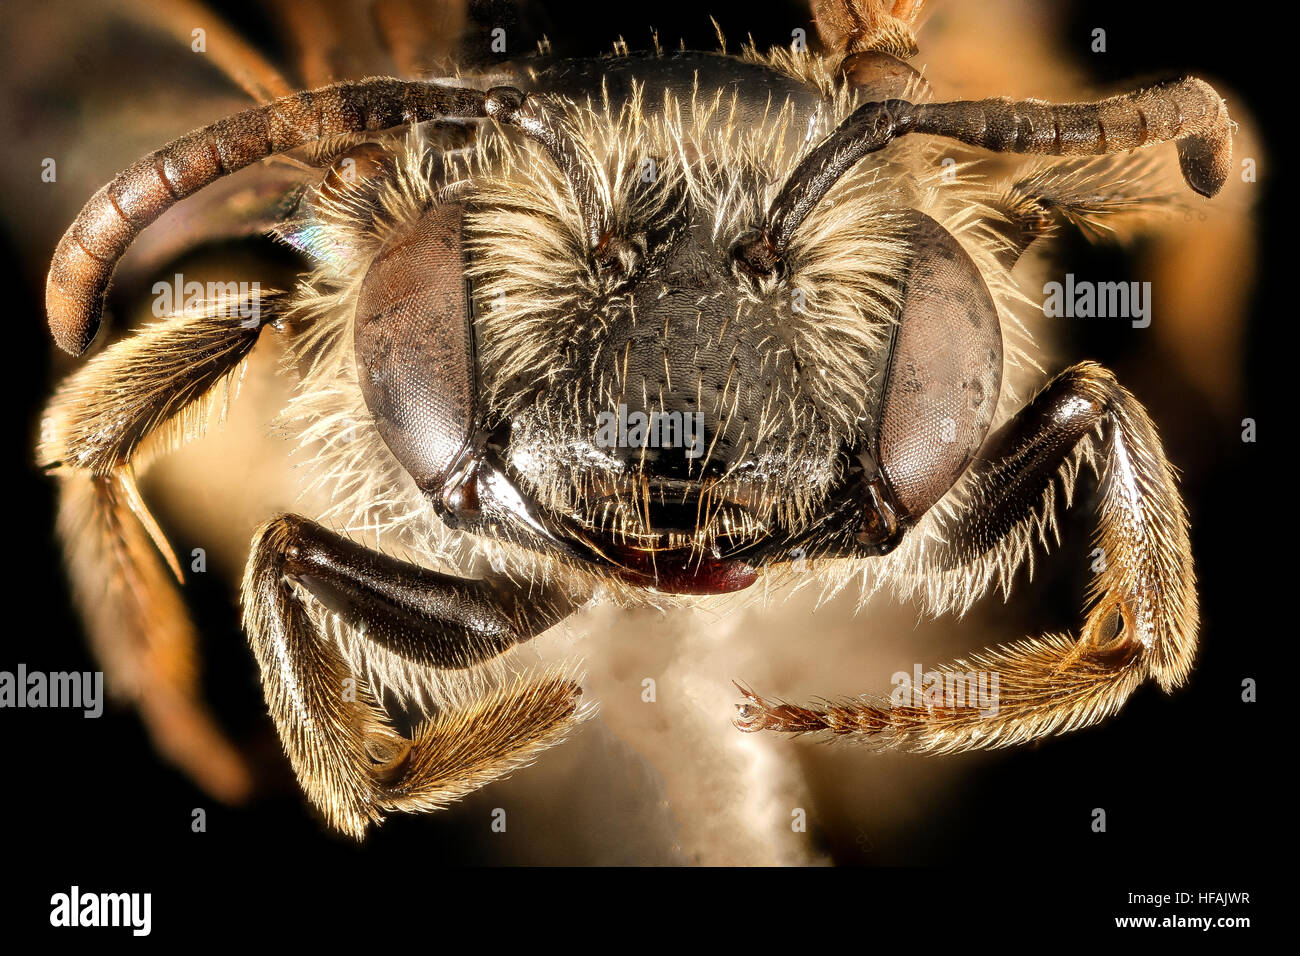 Andrena robertsonii, f, face, Baltimore Co, MD 2016-04-15-19.18 Andrena robertsonii, f, face, Baltimore Co, MD 2016-04-15-1918 26696642371 o Stock Photo